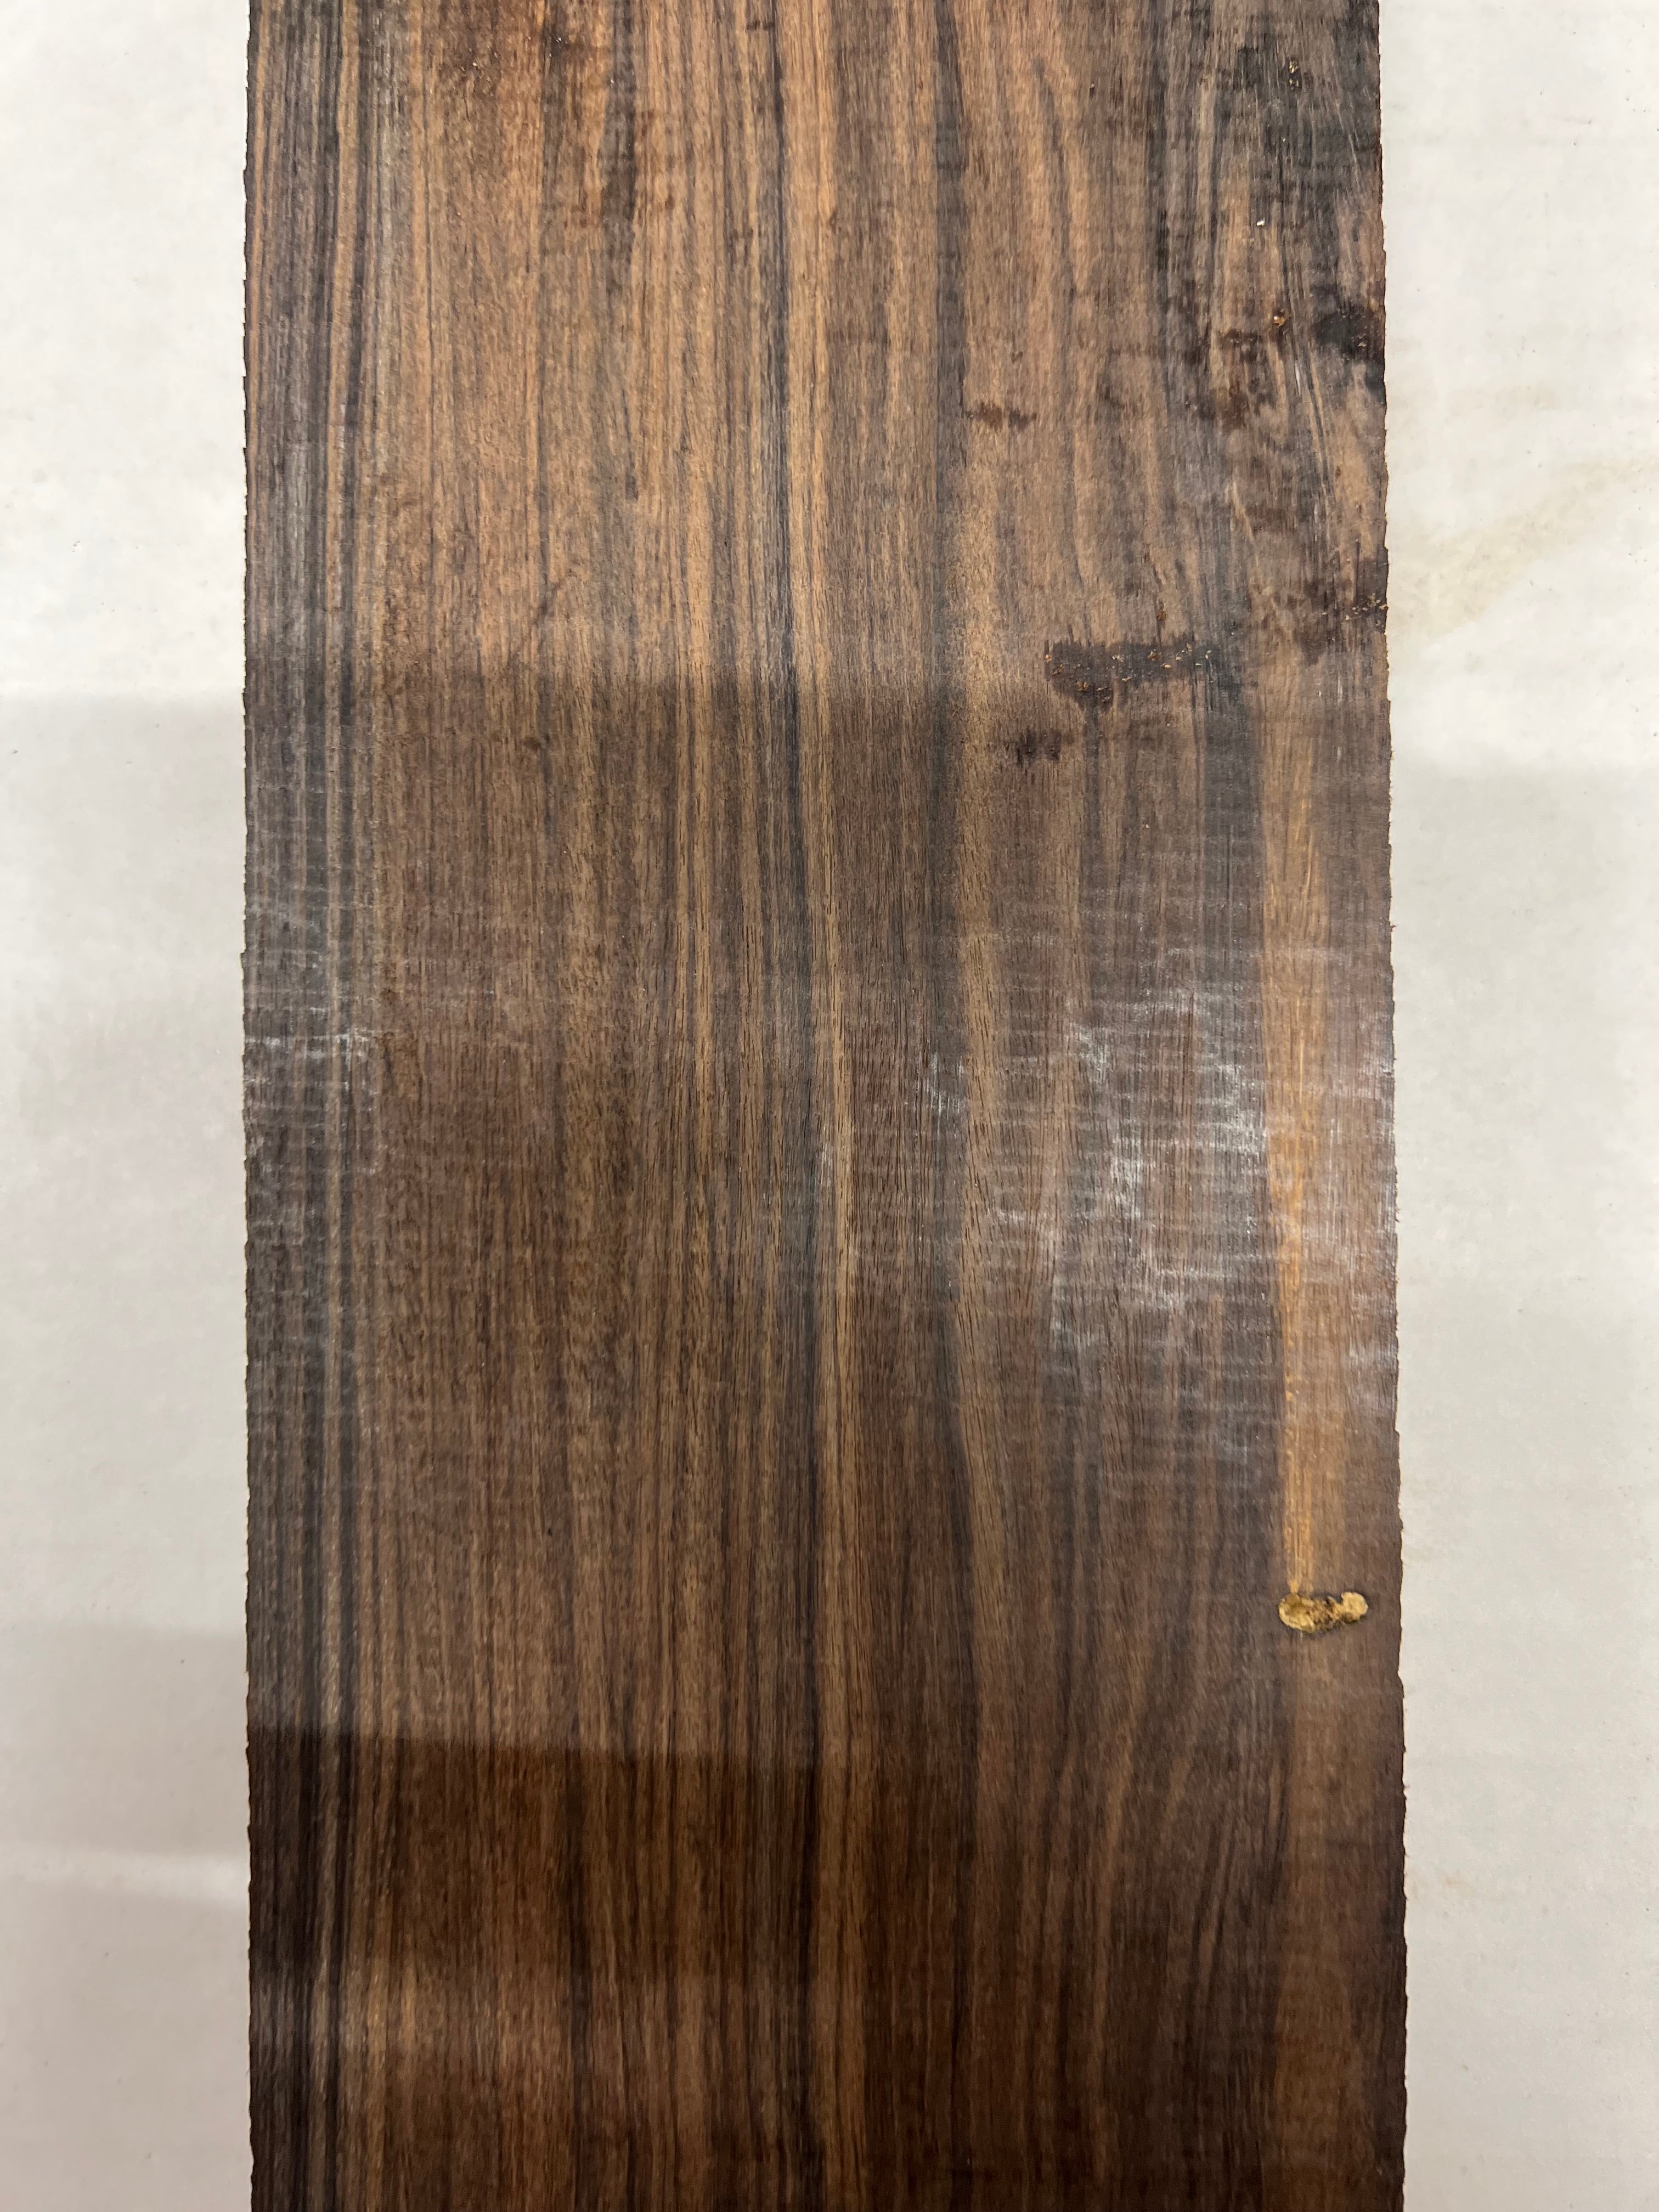 Santos Rosewood Thin Stock Three Dimensional Lumber Board 29&quot;x3-7/8&quot;x7/8&quot; 